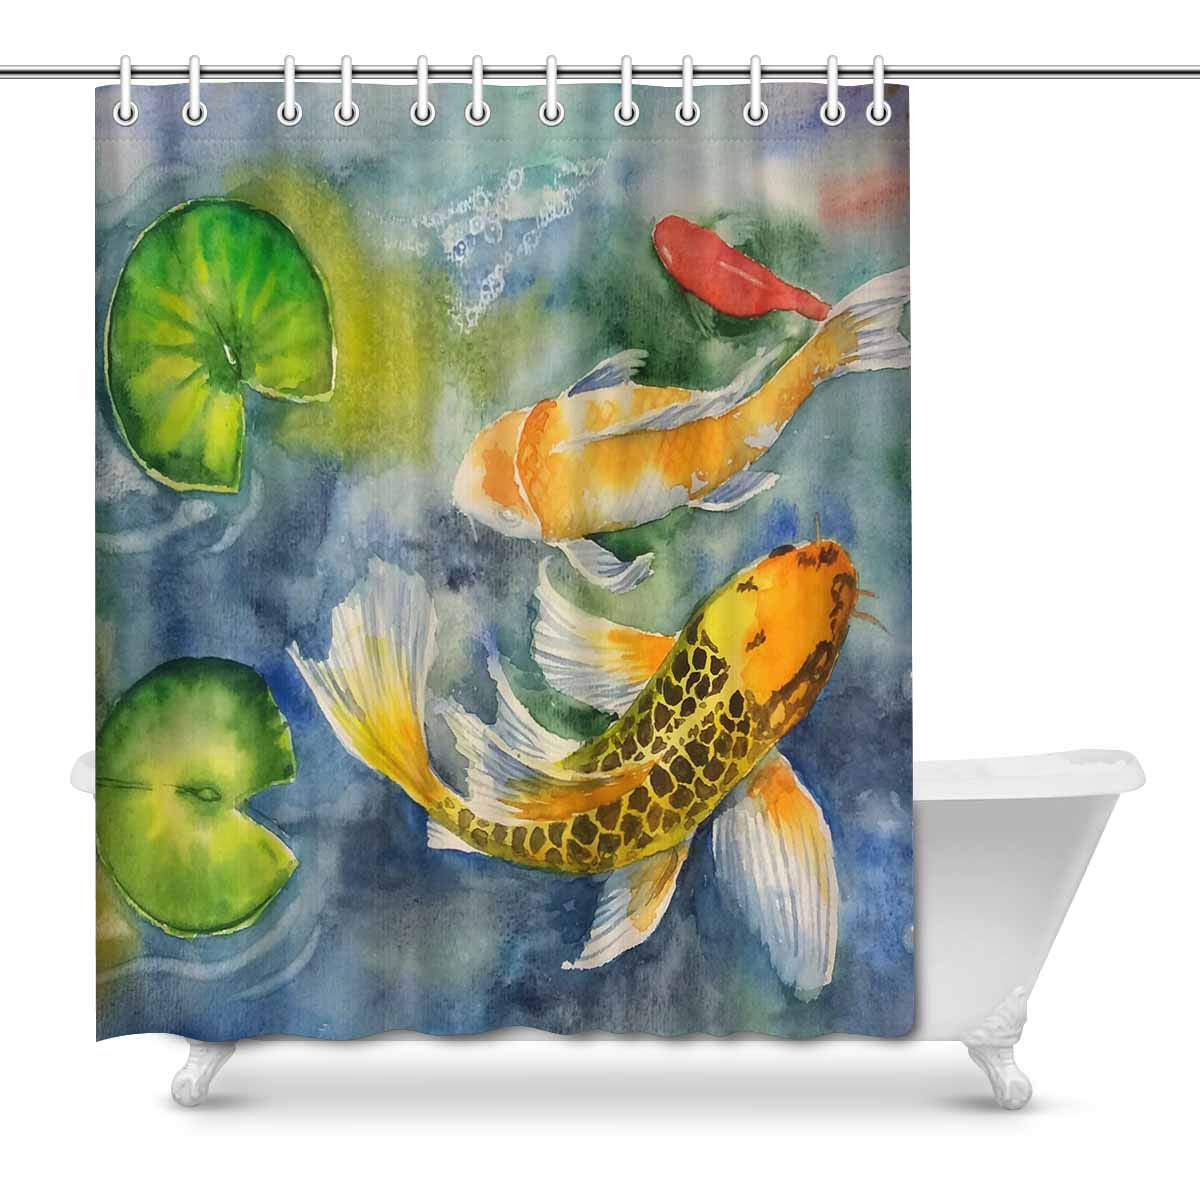 Asian Koi Fish and Lotus Dragonfly Pond Decor for Bathroom Details about   Koi Shower Curtain 